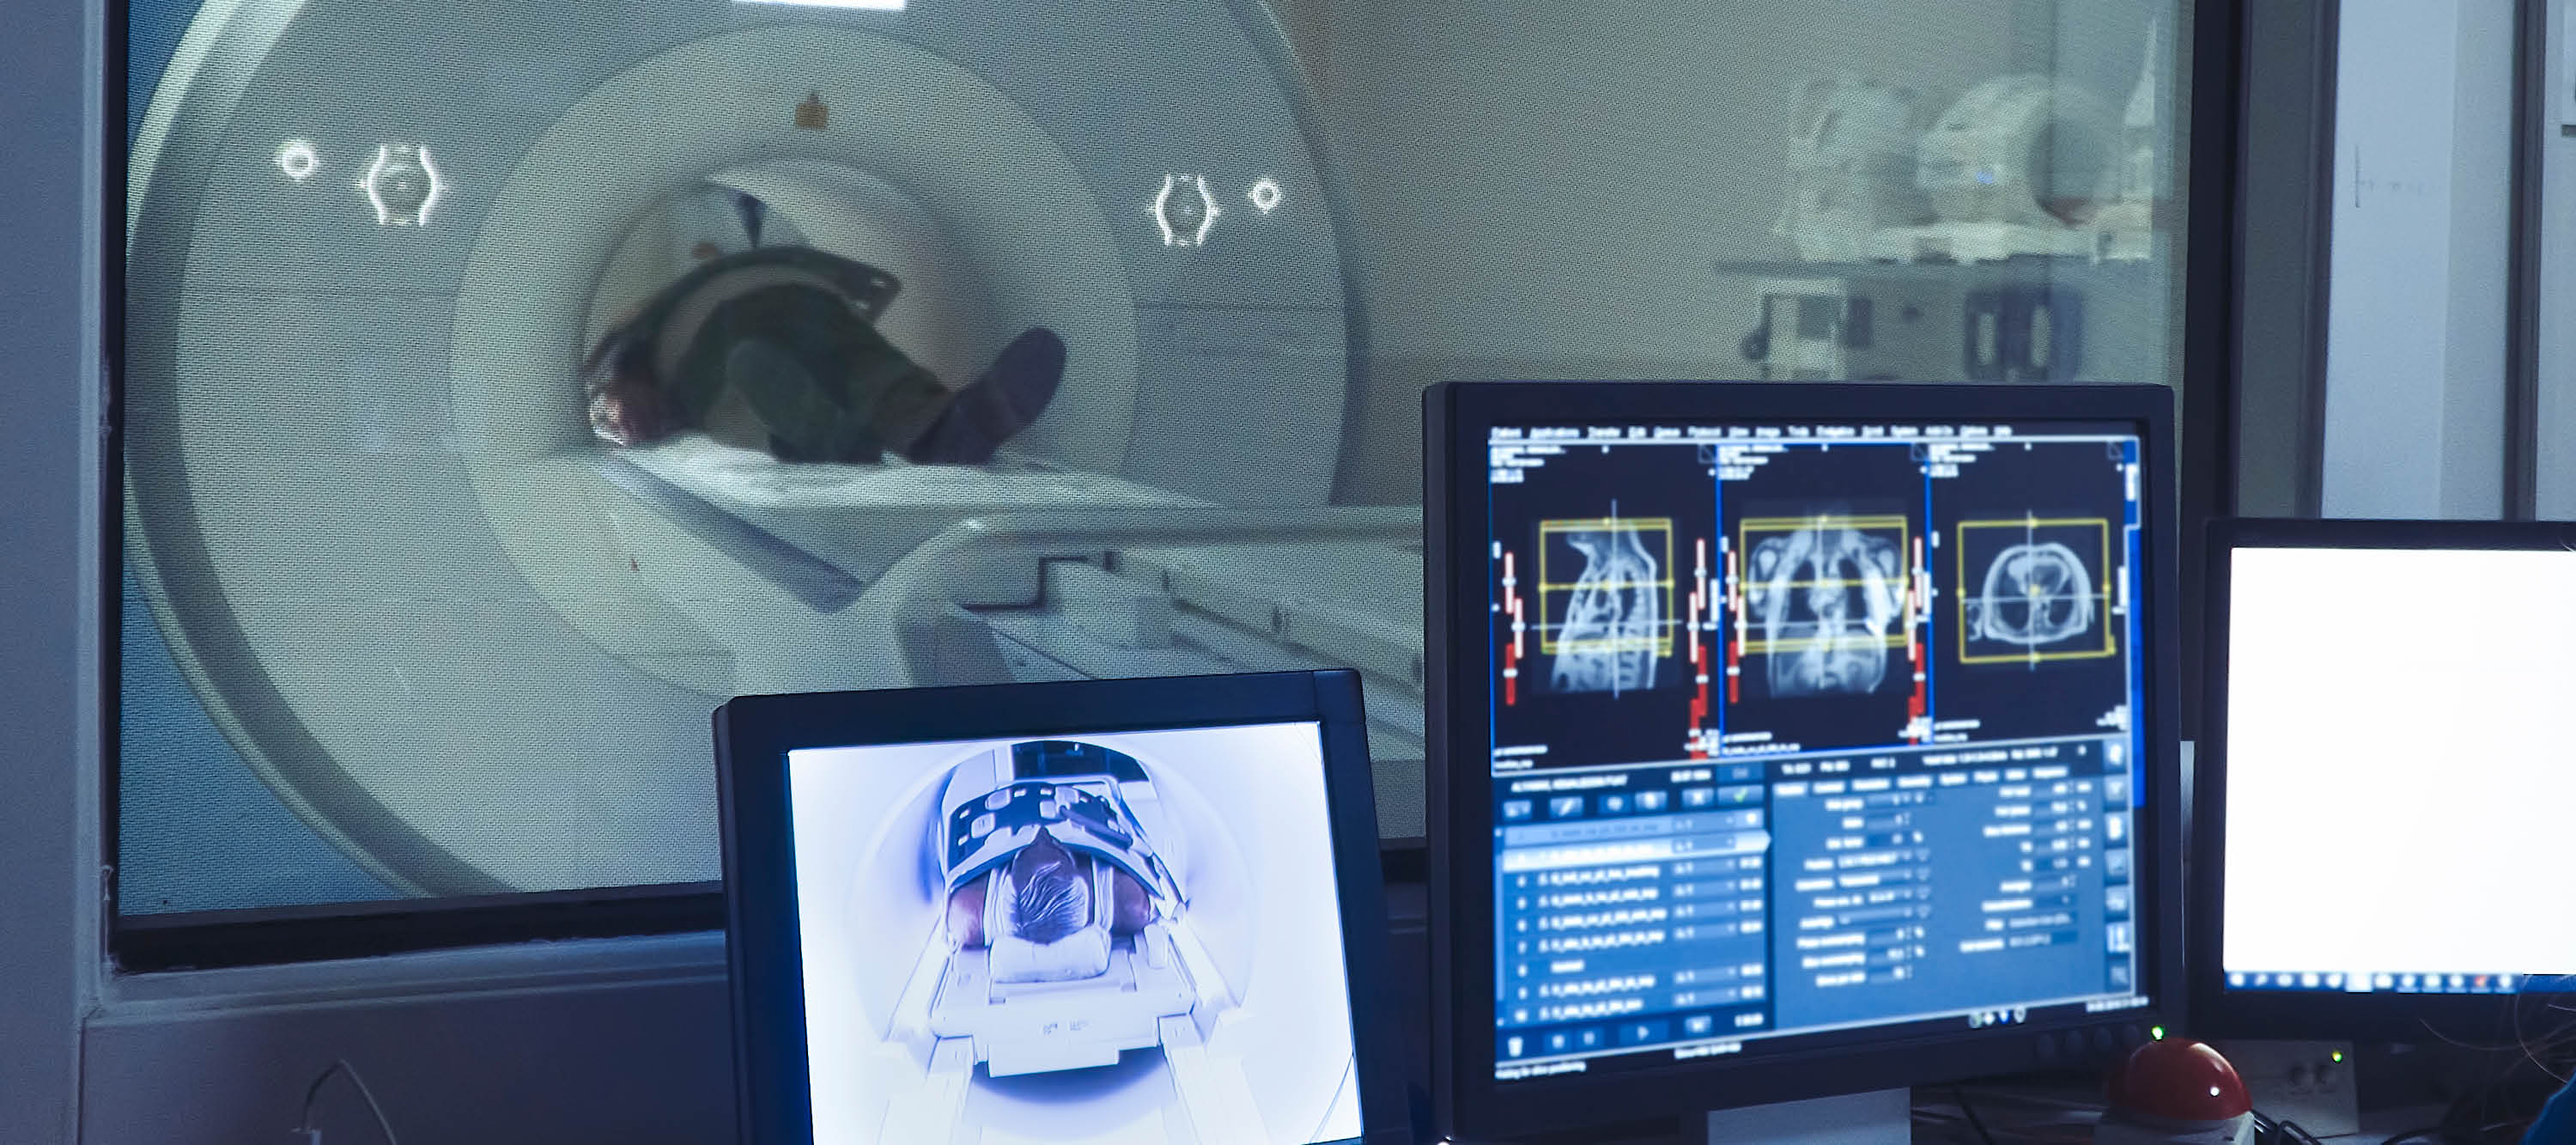 Patient inside CT machine and computer screens displaying images